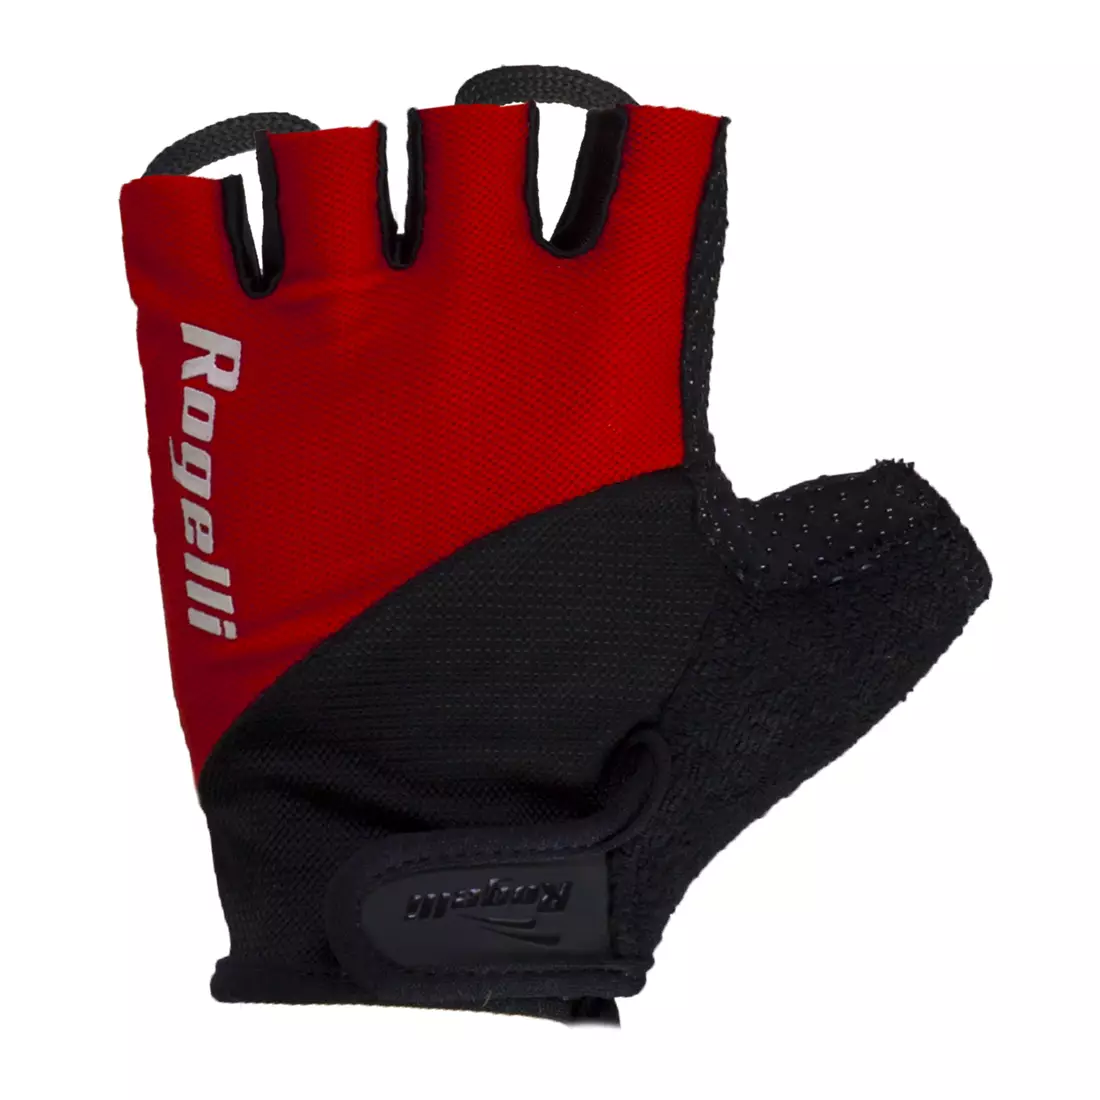 ROGELLI DUCOR cycling gloves 006.029, red